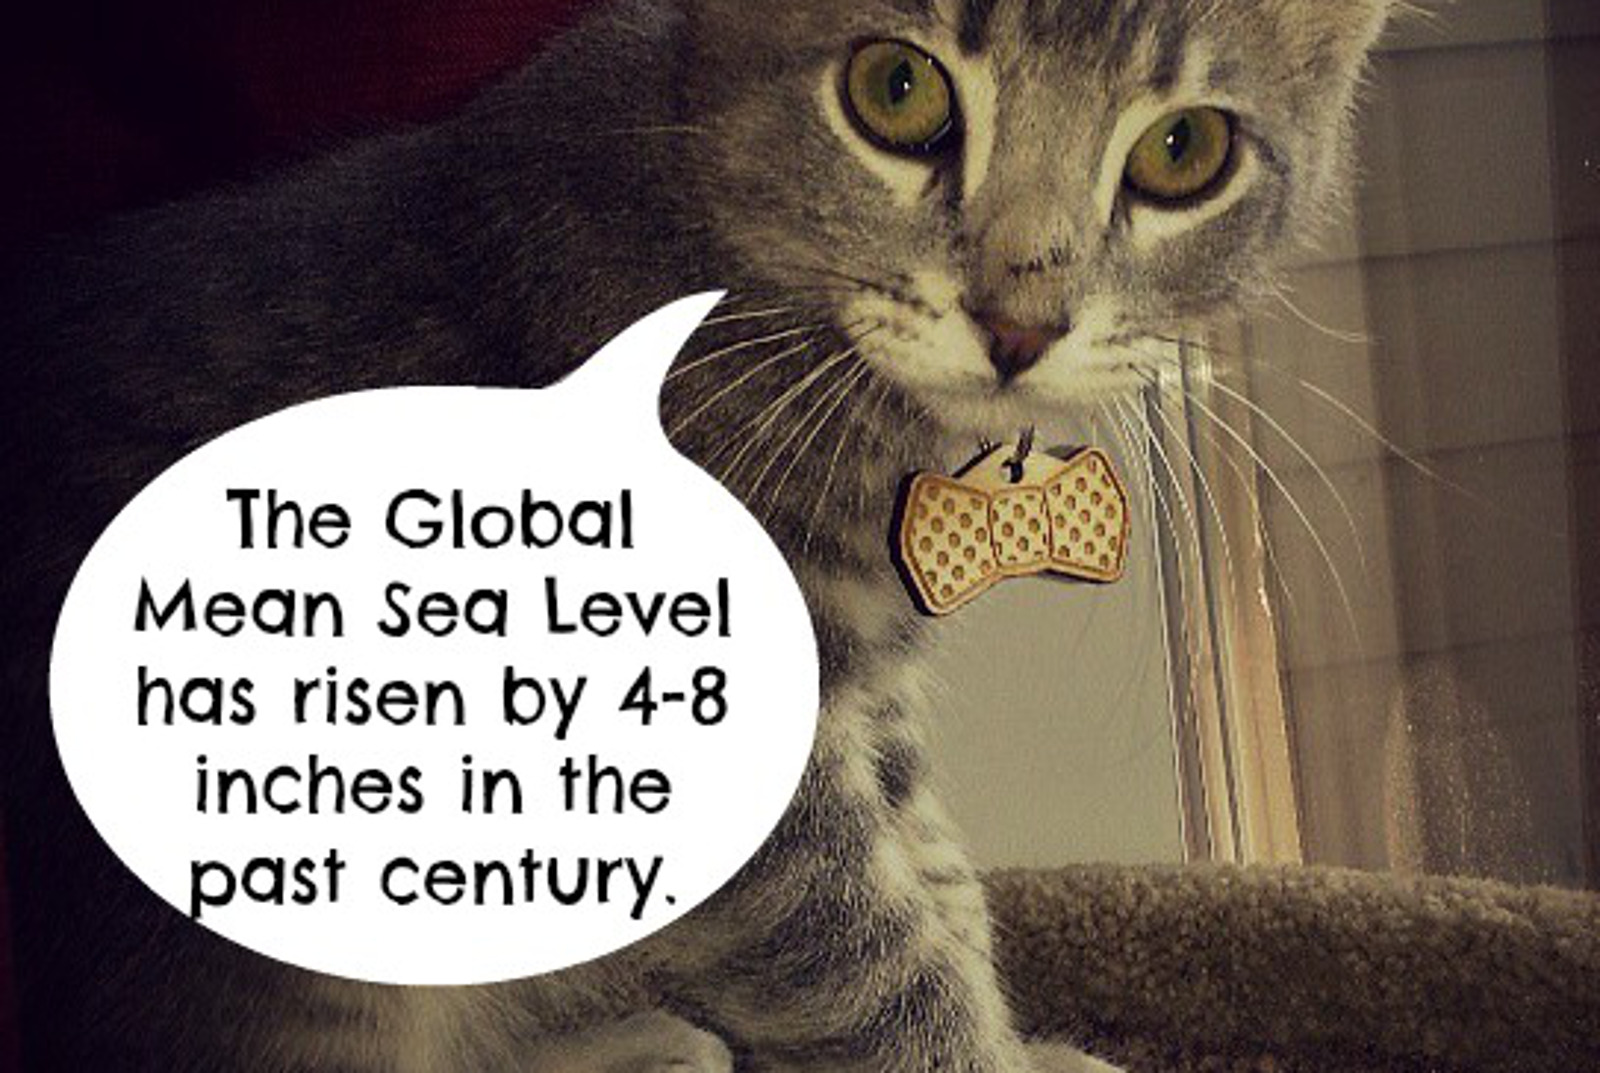 Cats and Climate Change